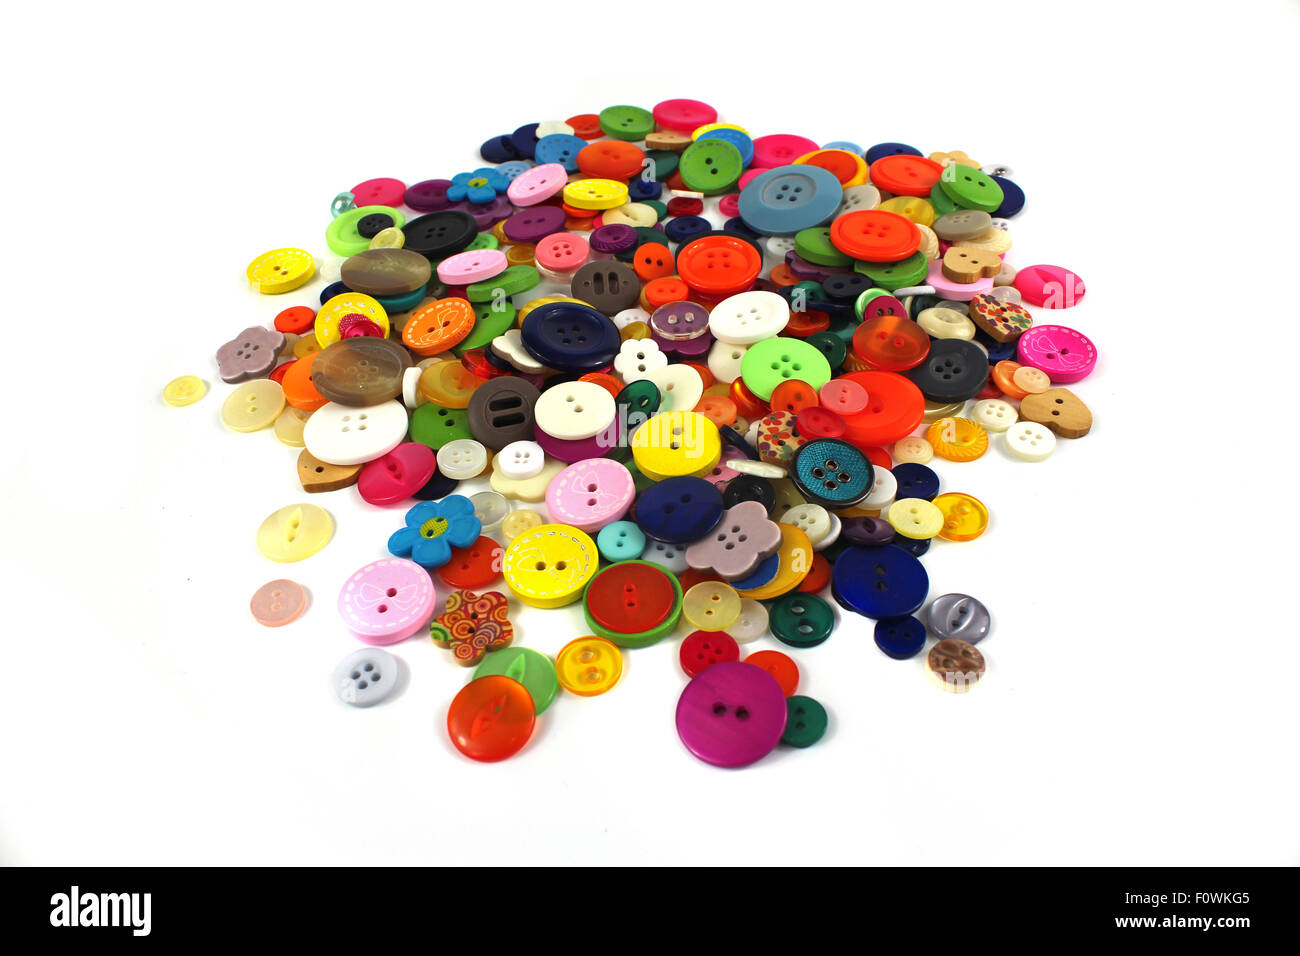 Pile of brightly coloured haberdashery buttons Stock Photo